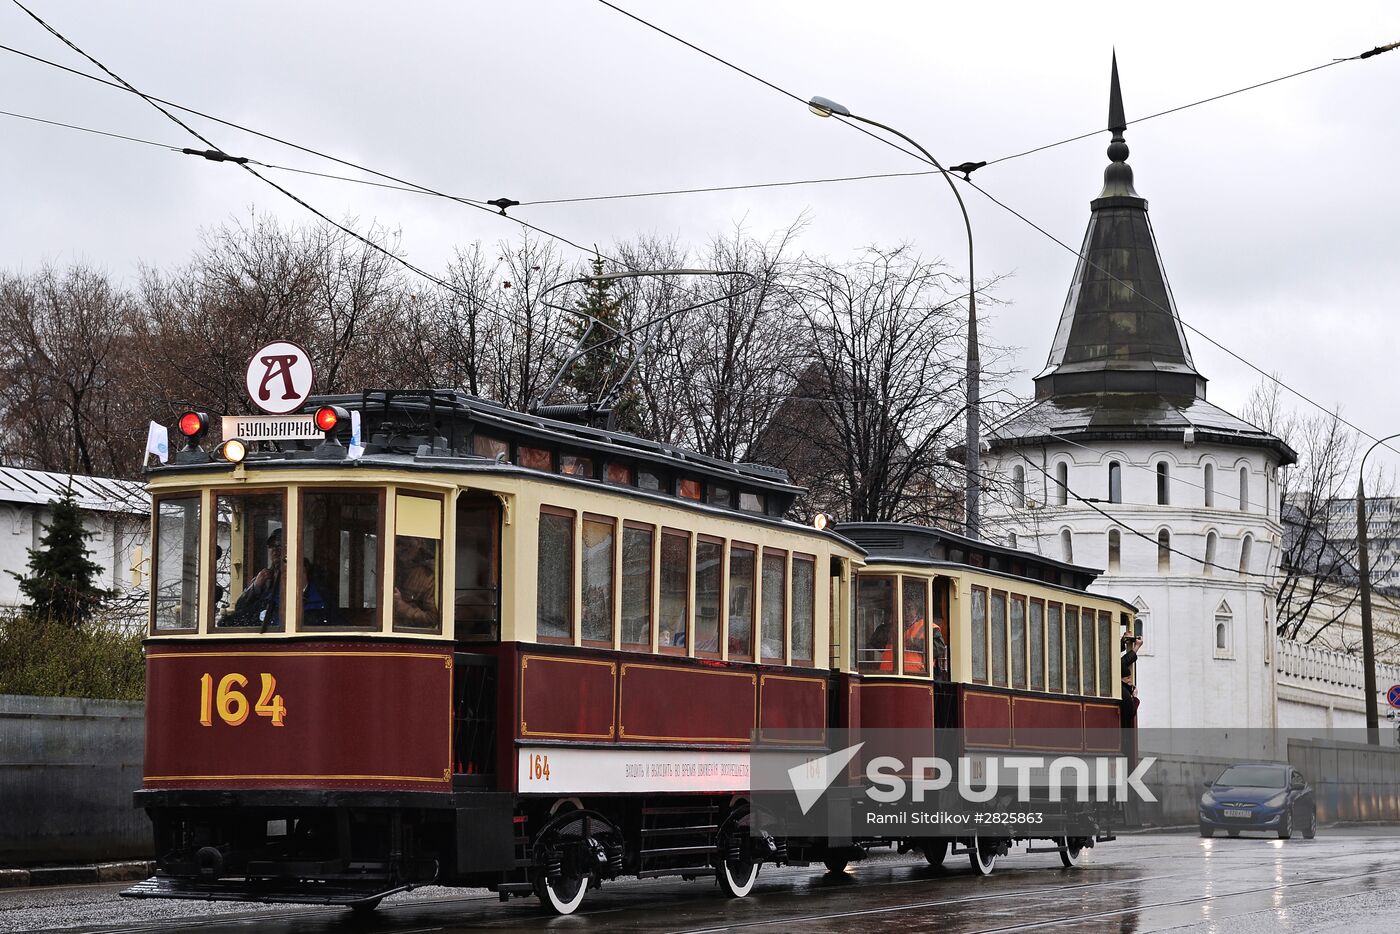 Moscow Tram Festival in Chistye Prudy